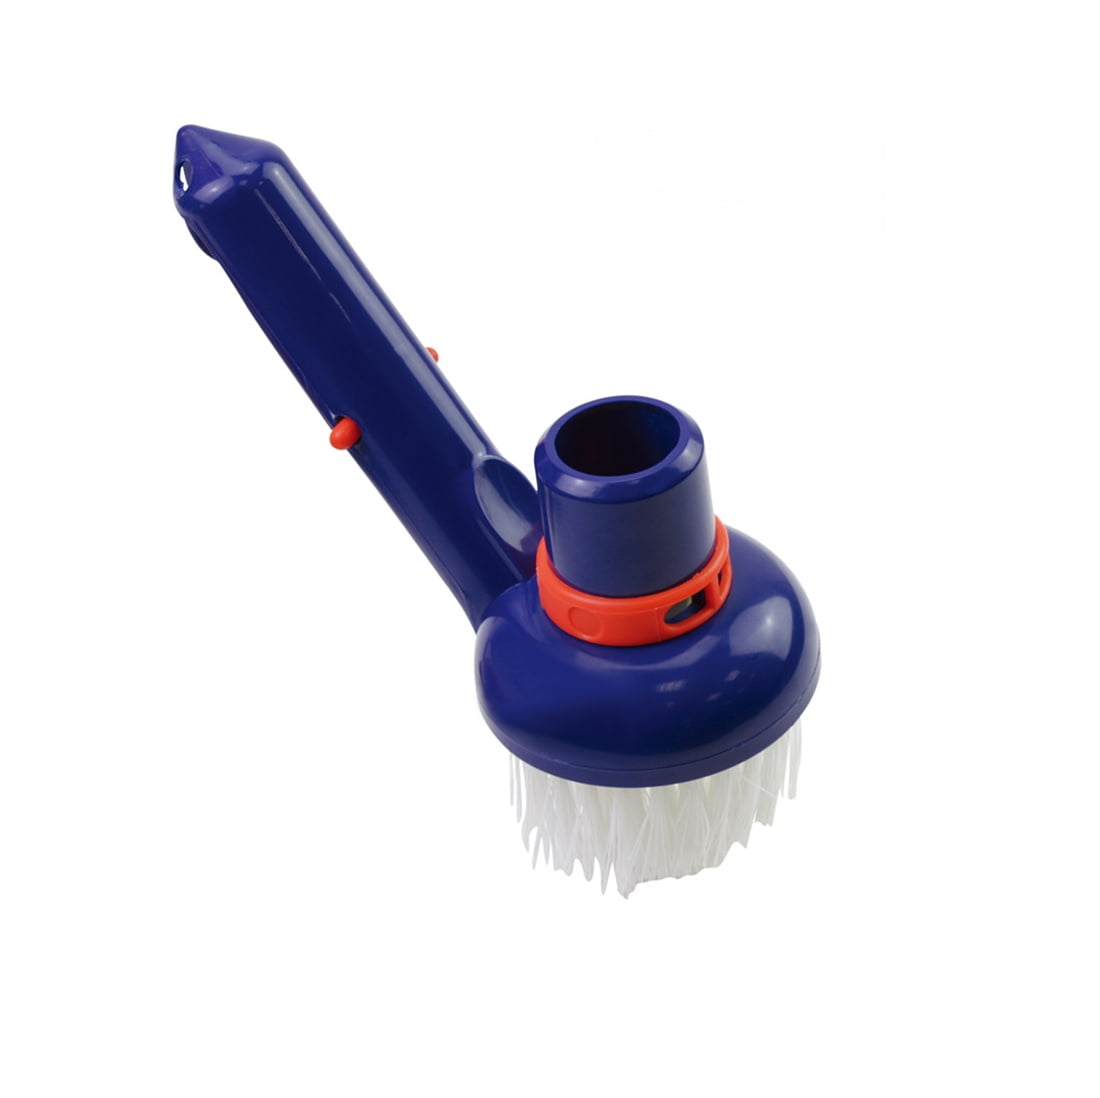 PoolSupplyTown Pool Spa Corner & Step Brush Vacuum Head with Nylon Bristles-Great and Safe for Brushing and Vacuuming Hard-To-Reach Spots/Corners in Pool & Spa 